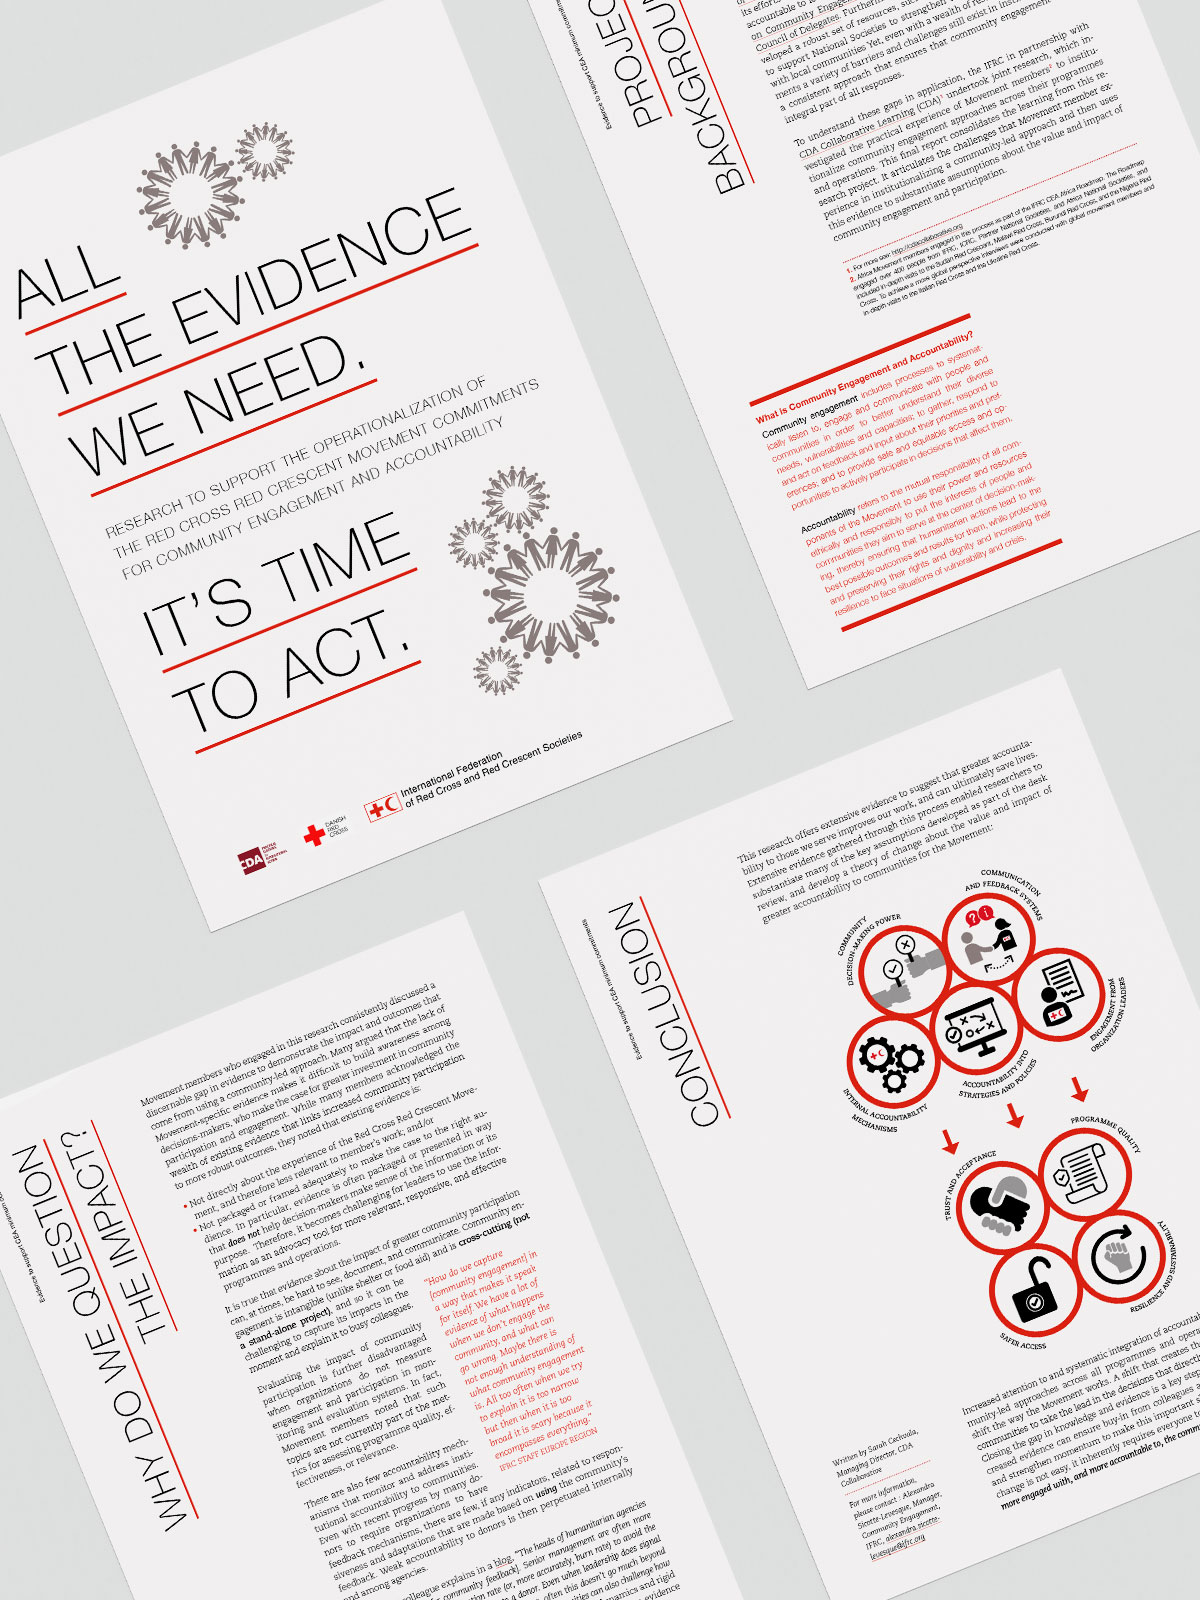 ifrc_all_the_evidence_we_need_1.jpg